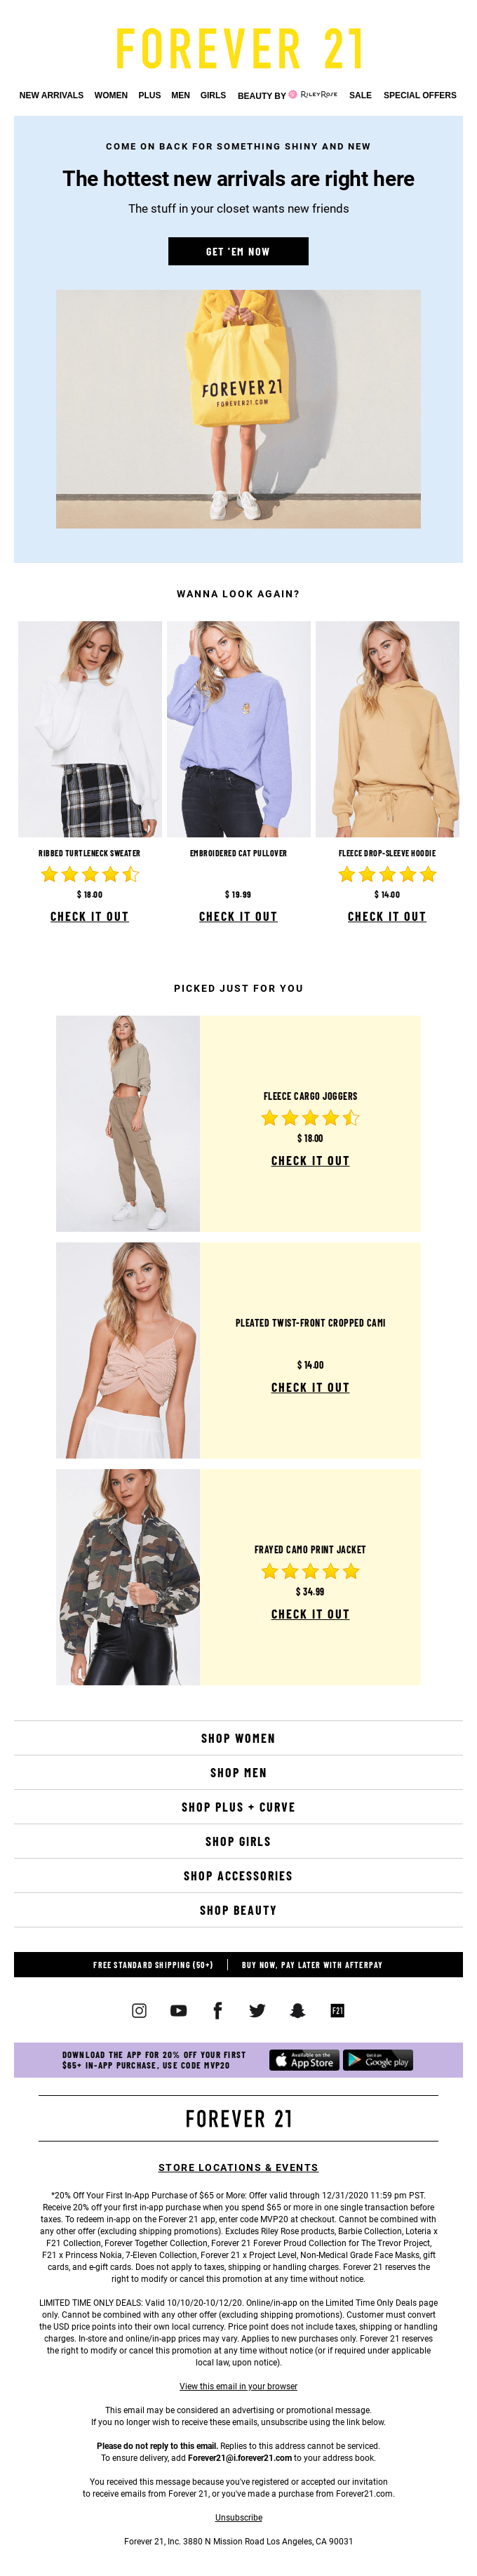 Forever21 follow up email